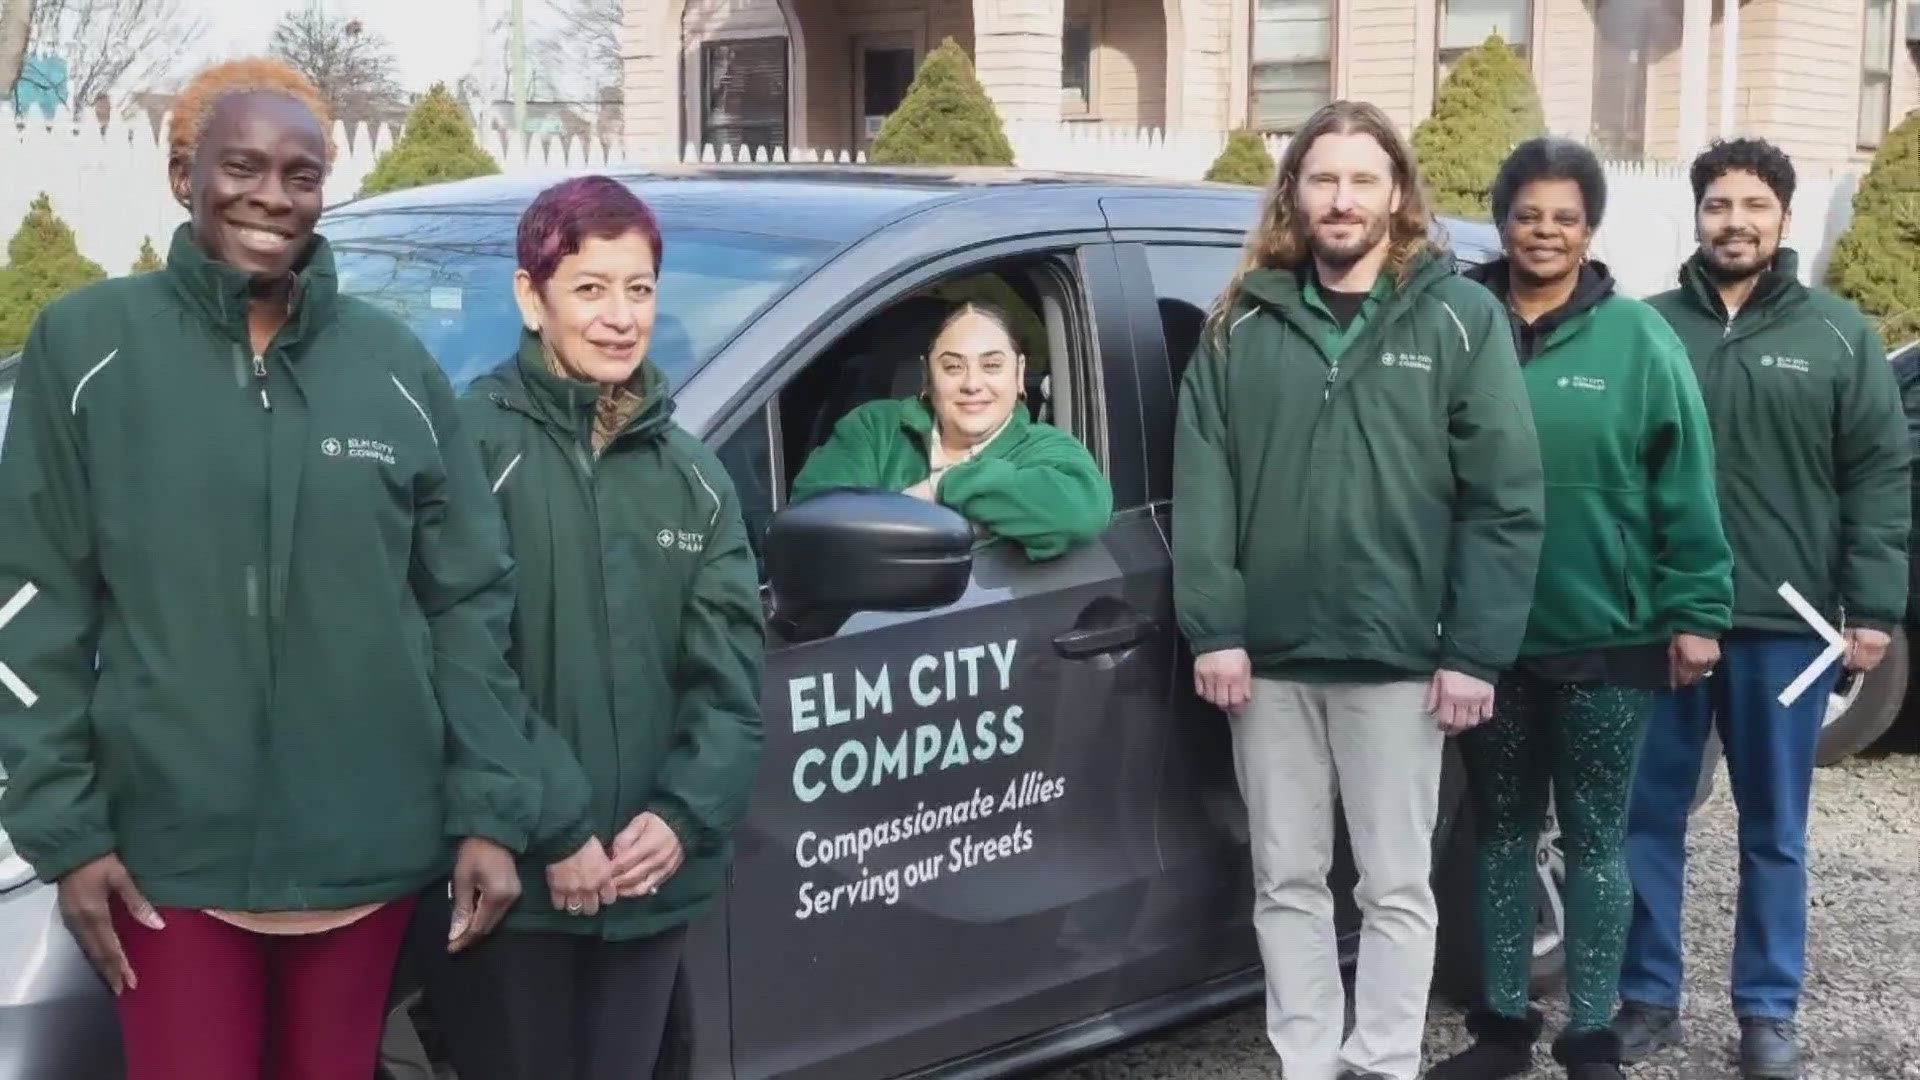 The Elm city Compass team is a group of people working to help people in distress without the help of police.